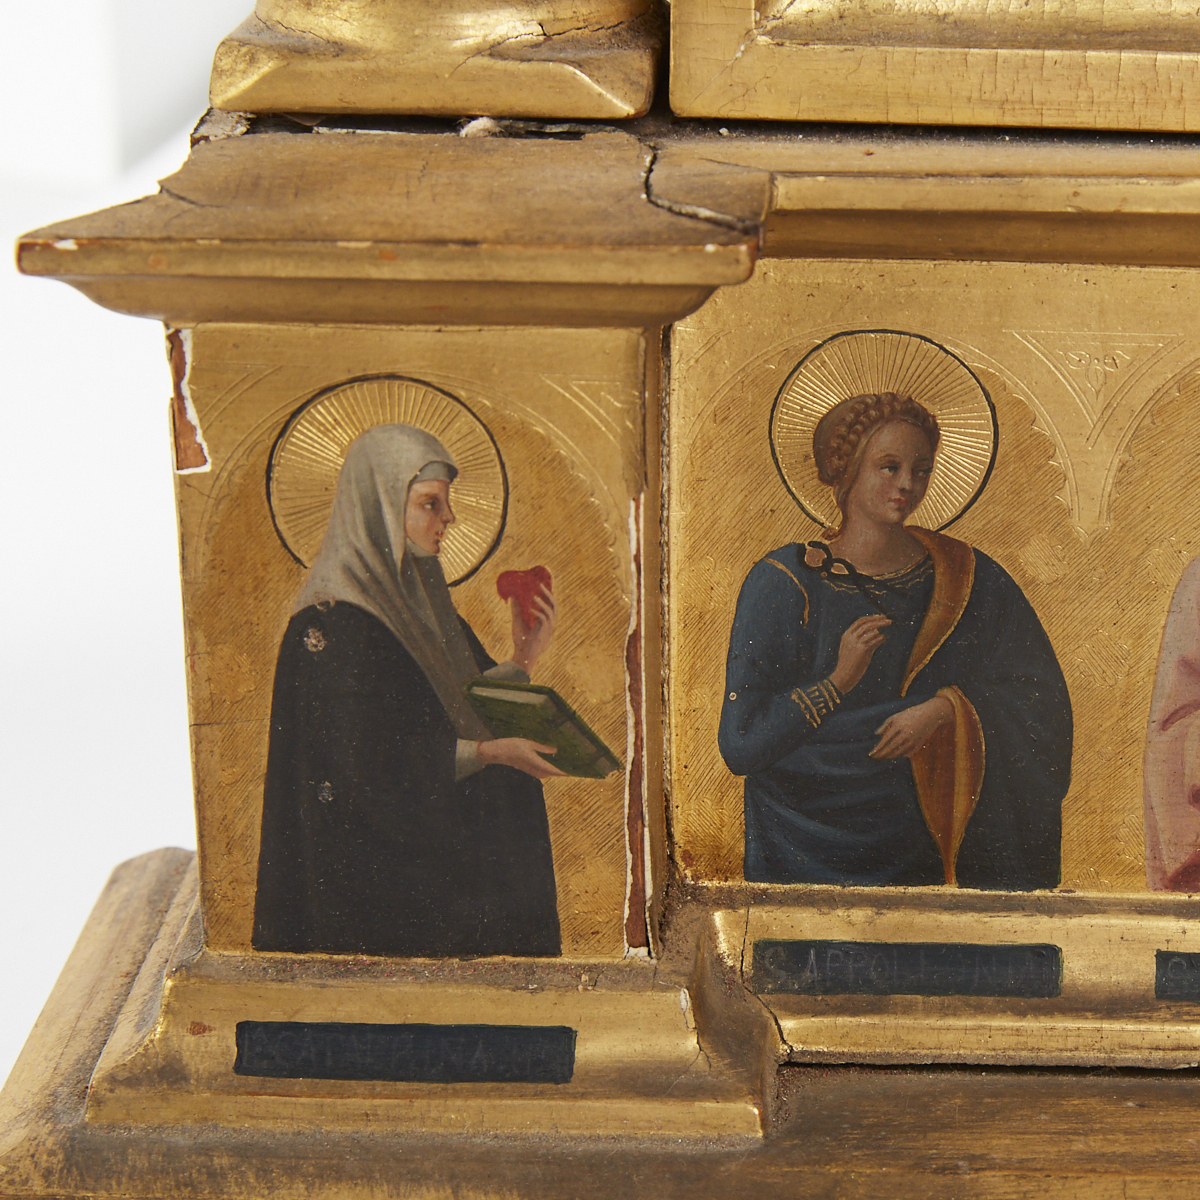 After Fra Angelico "The Annunciation and Adoration of the Magi" Tempera Gold on Panel - Image 4 of 10